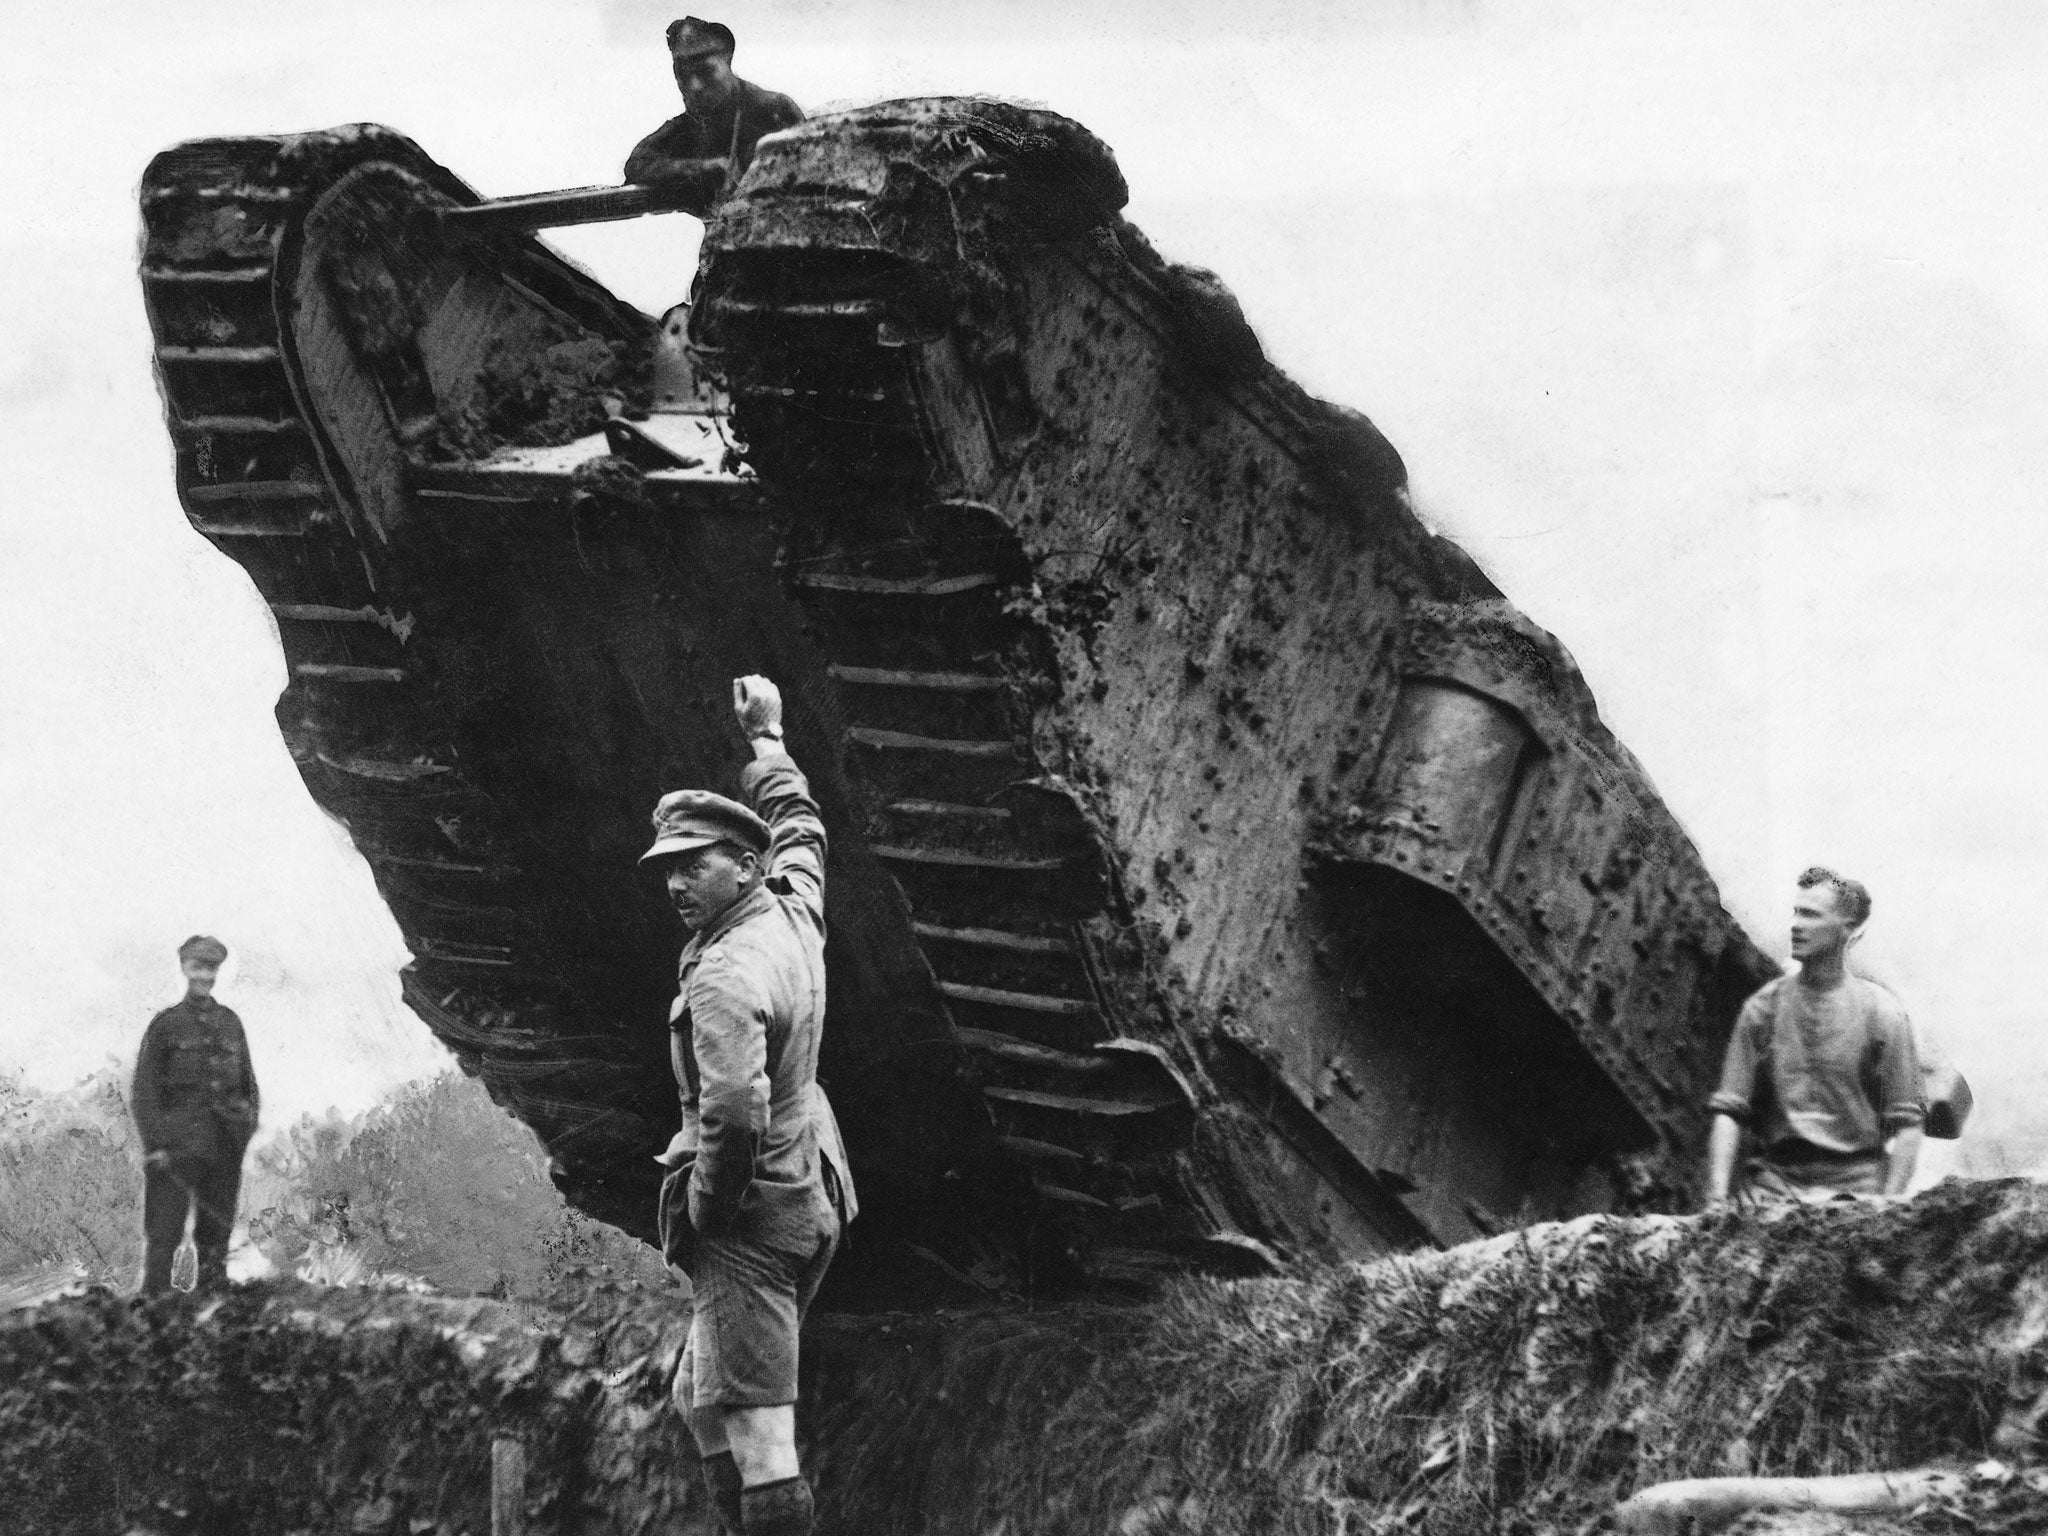 A British tank, typical of the latter years of WW1, maneuvers its way over a trench system during the Battle of Cambrai. Also known as 'Landships', these armoured vehicles were designed to traverse the boggy terrain of the French war-torn countryside.